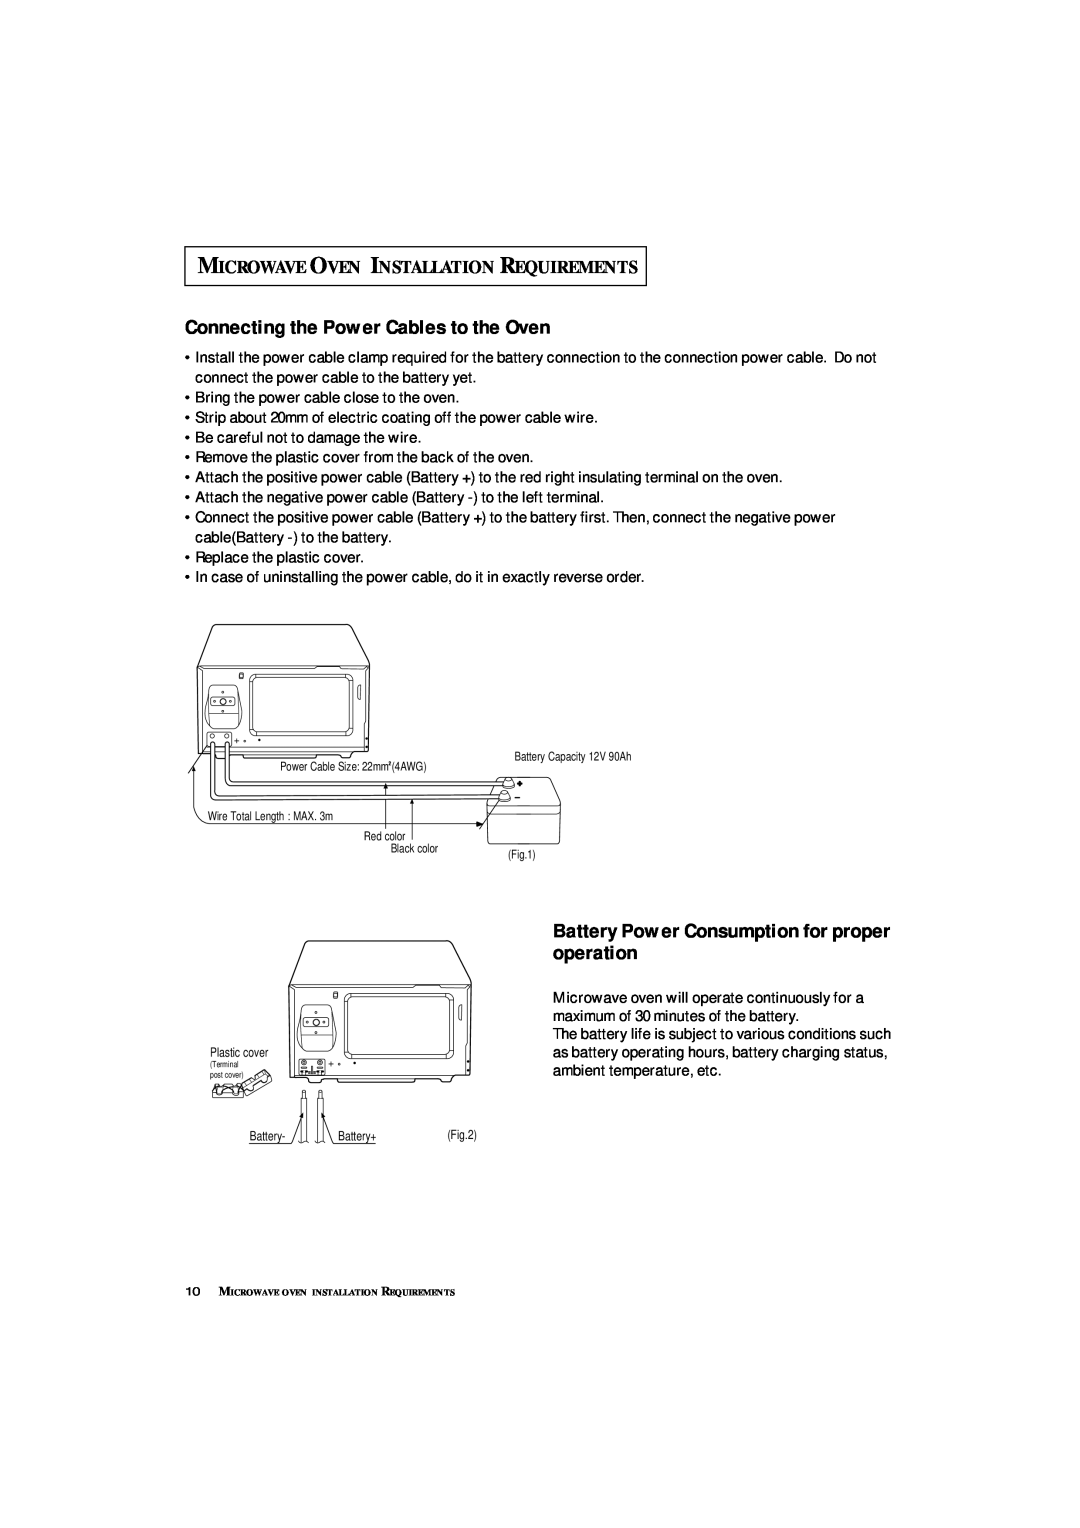 Samsung DE7711N owner manual Connecting the Power Cables to the Oven, Battery Power Consumption for proper operation 